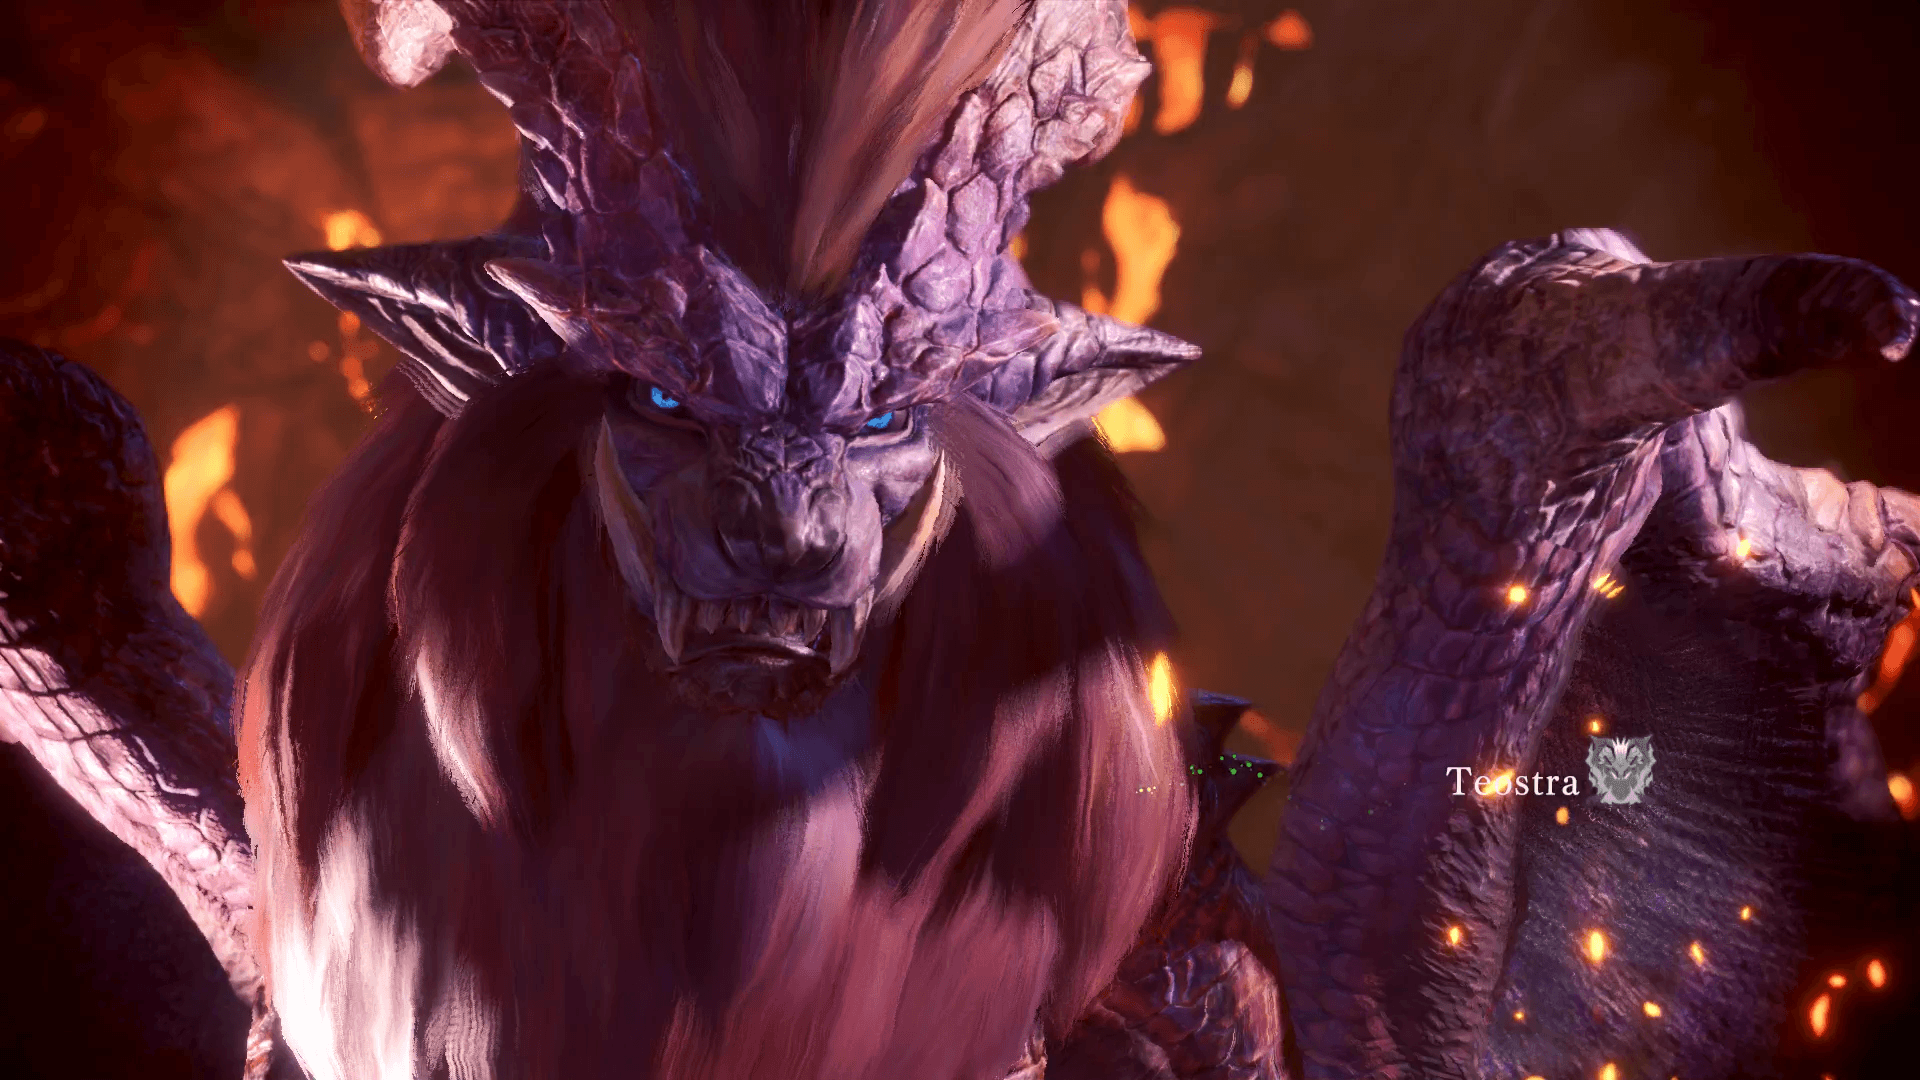 Monster Hunter World Teostra to Track and Kill the Teostra